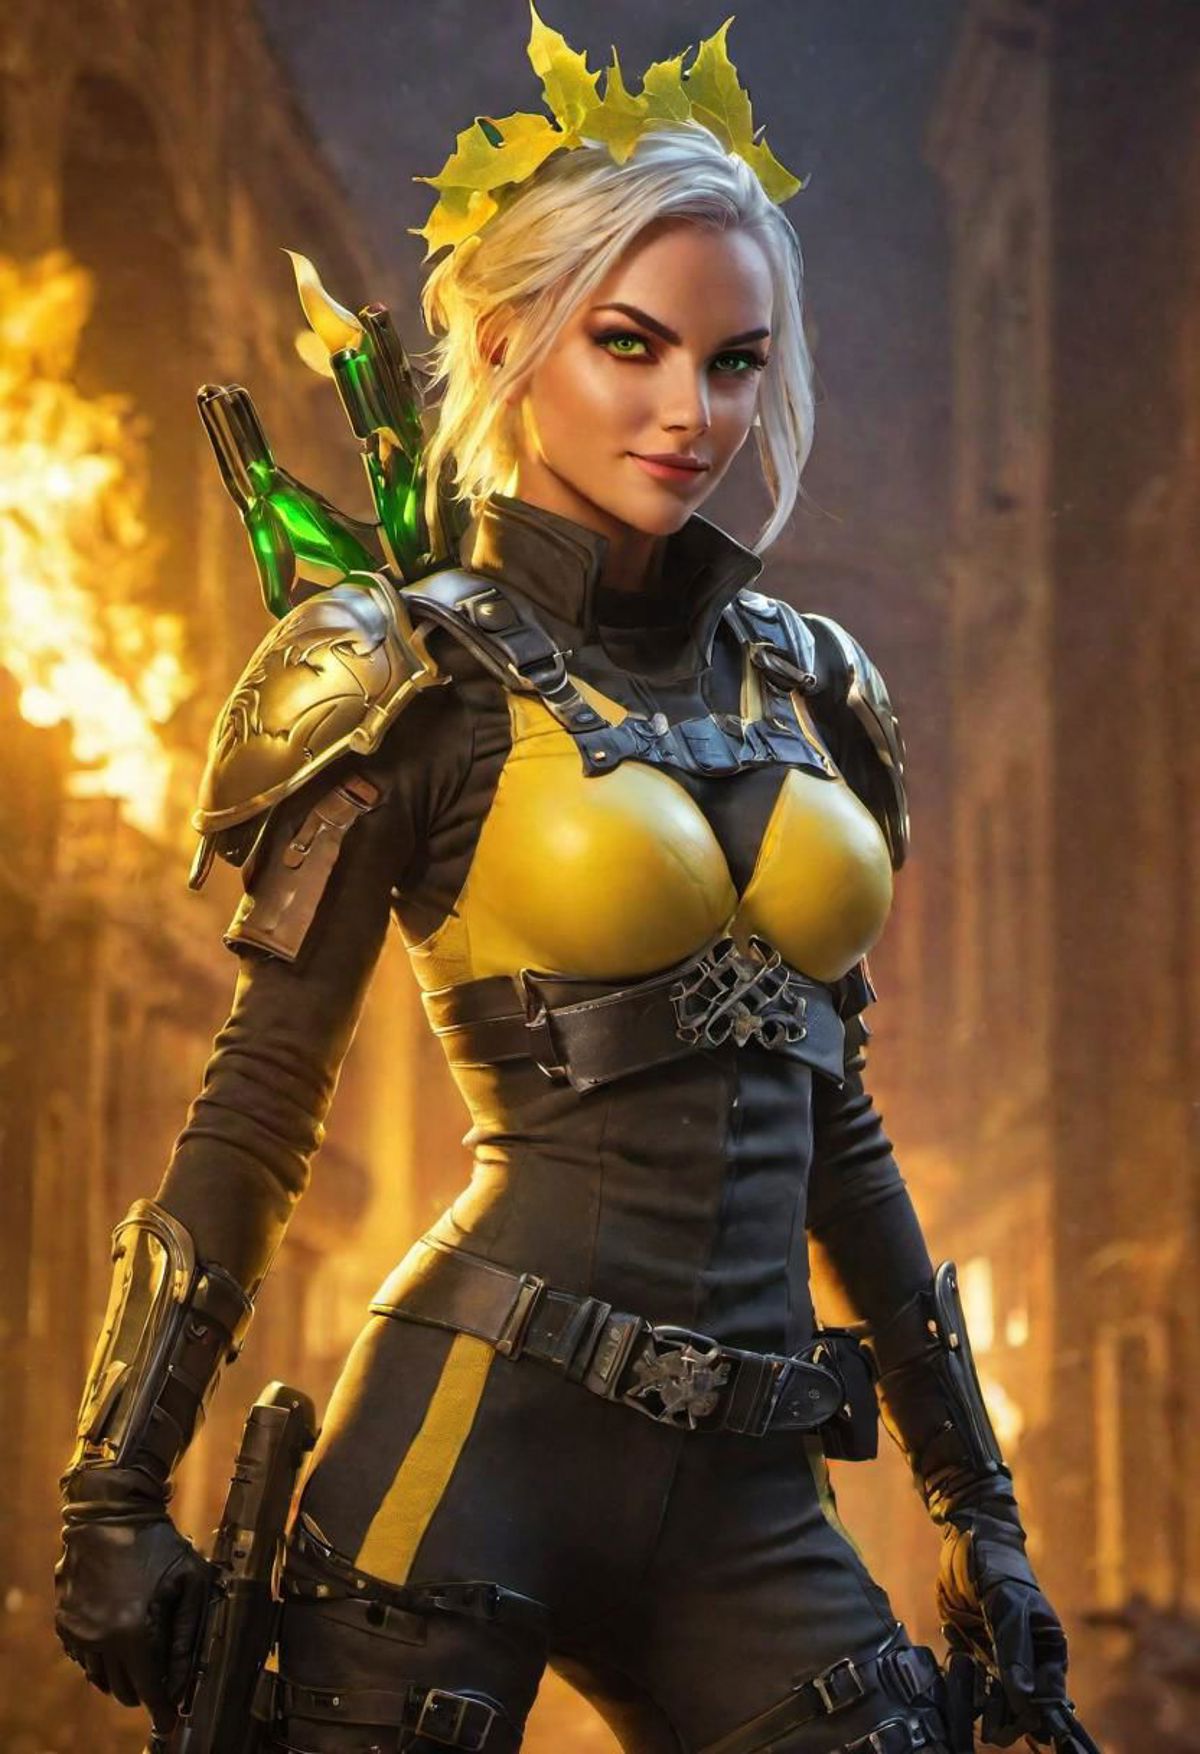 A 3D rendering of a woman wearing a black and yellow costume, holding a bow and arrow.